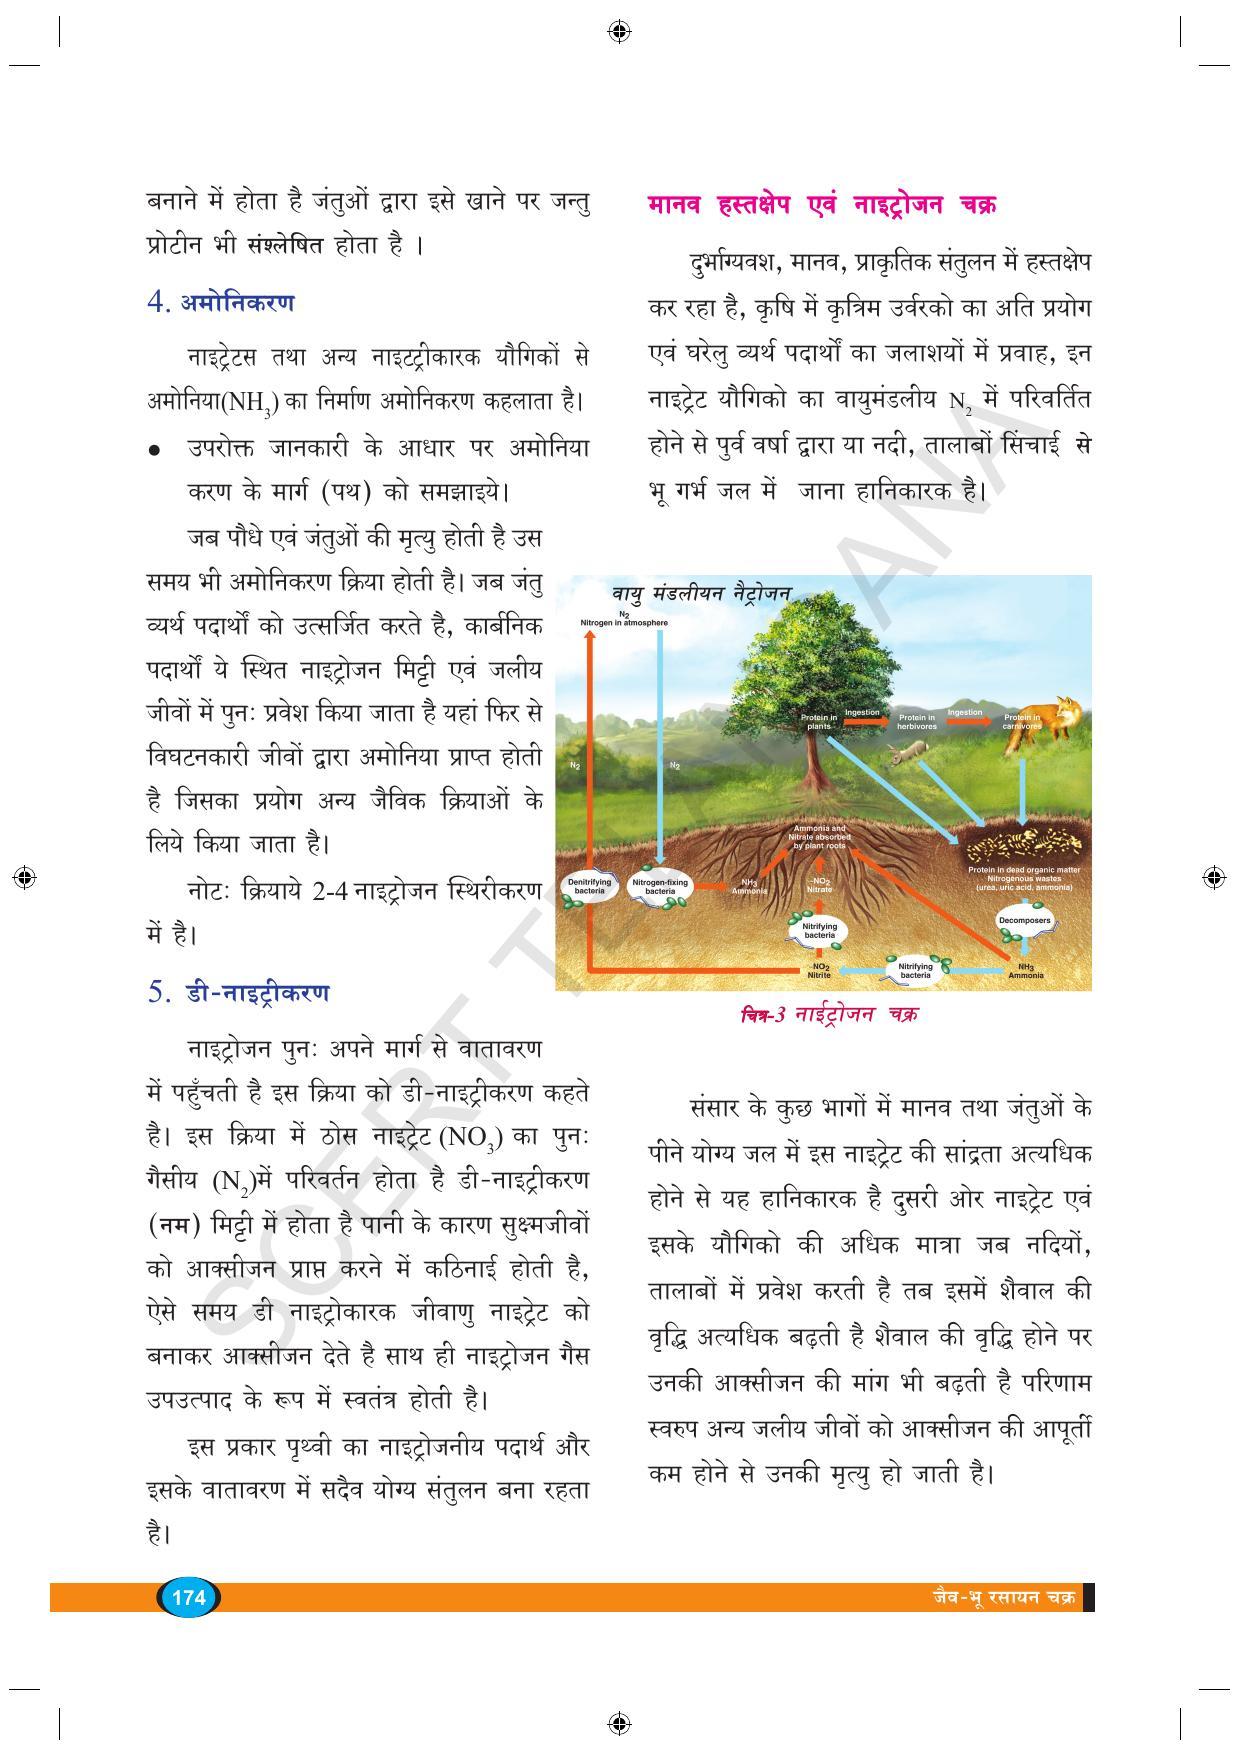 TS SCERT Class 9 Biological Science (Hindi Medium) Text Book - Page 186